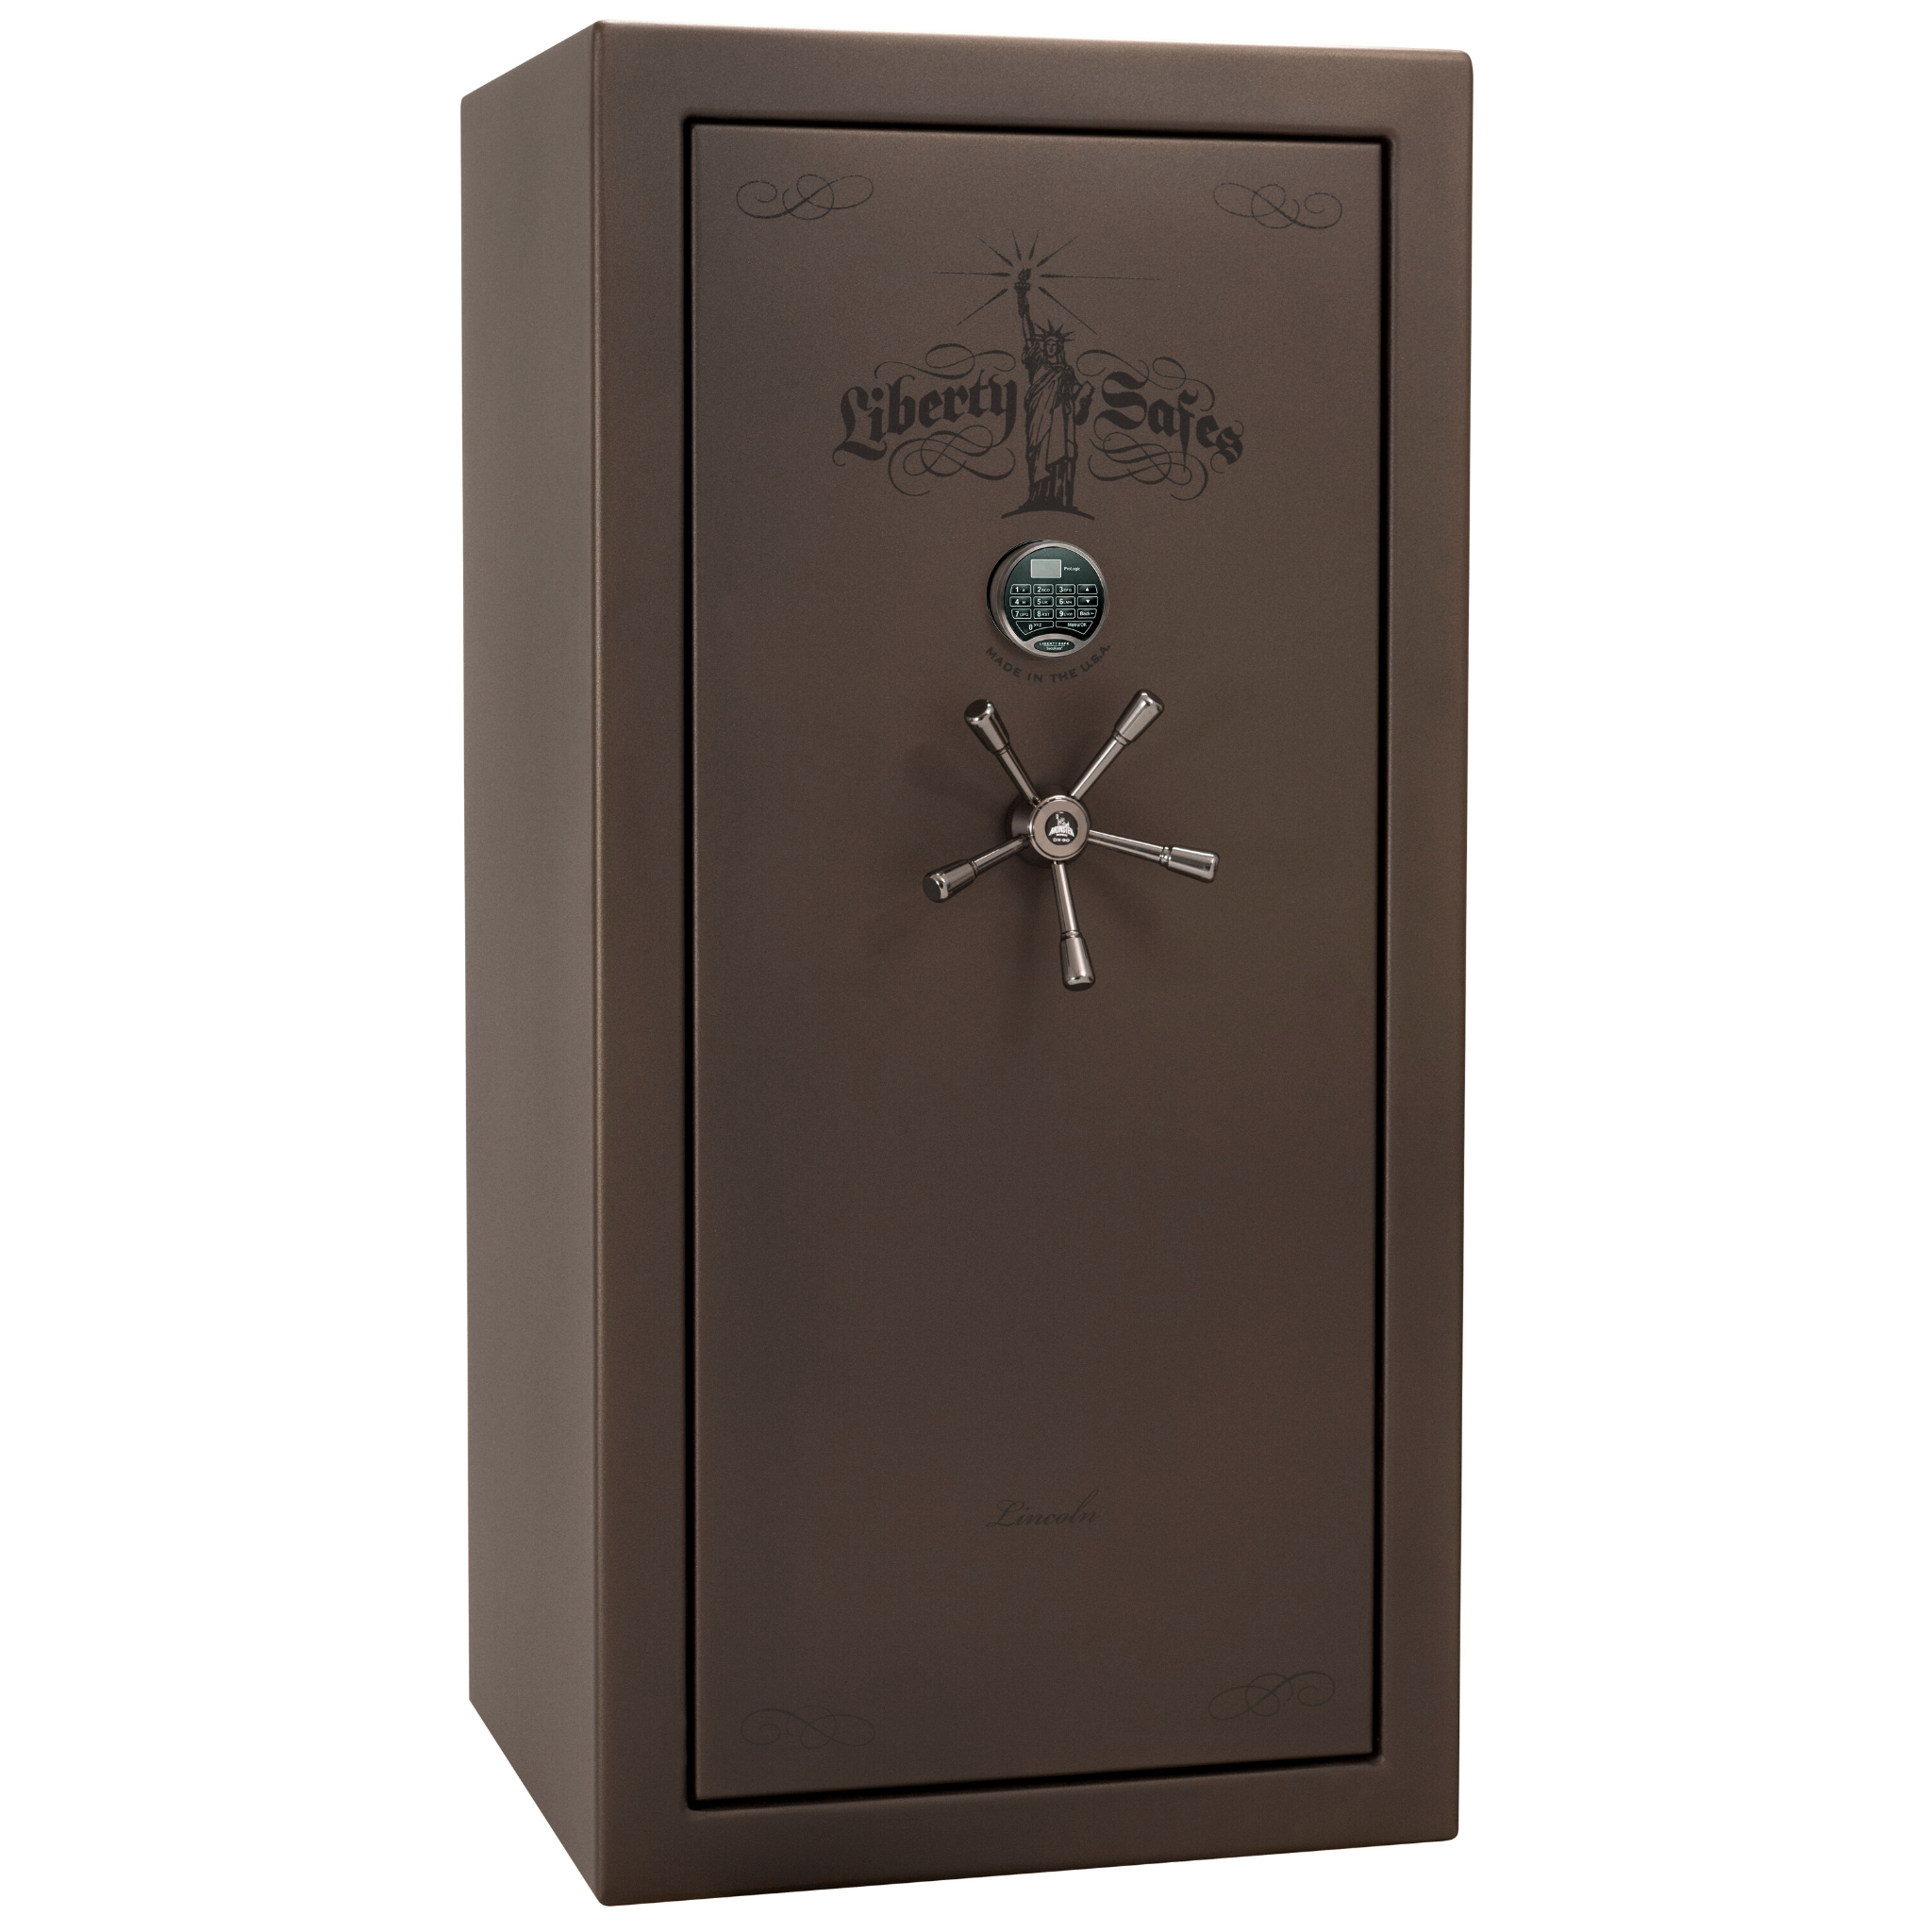 Lincoln Series | Level 5 Security | 110 Minute Fire Protection | 25 | Dimensions: 60.5"(H) x 30"(W) x 28.5"(D) | Gray Marble | Mechanical Lock, photo 9